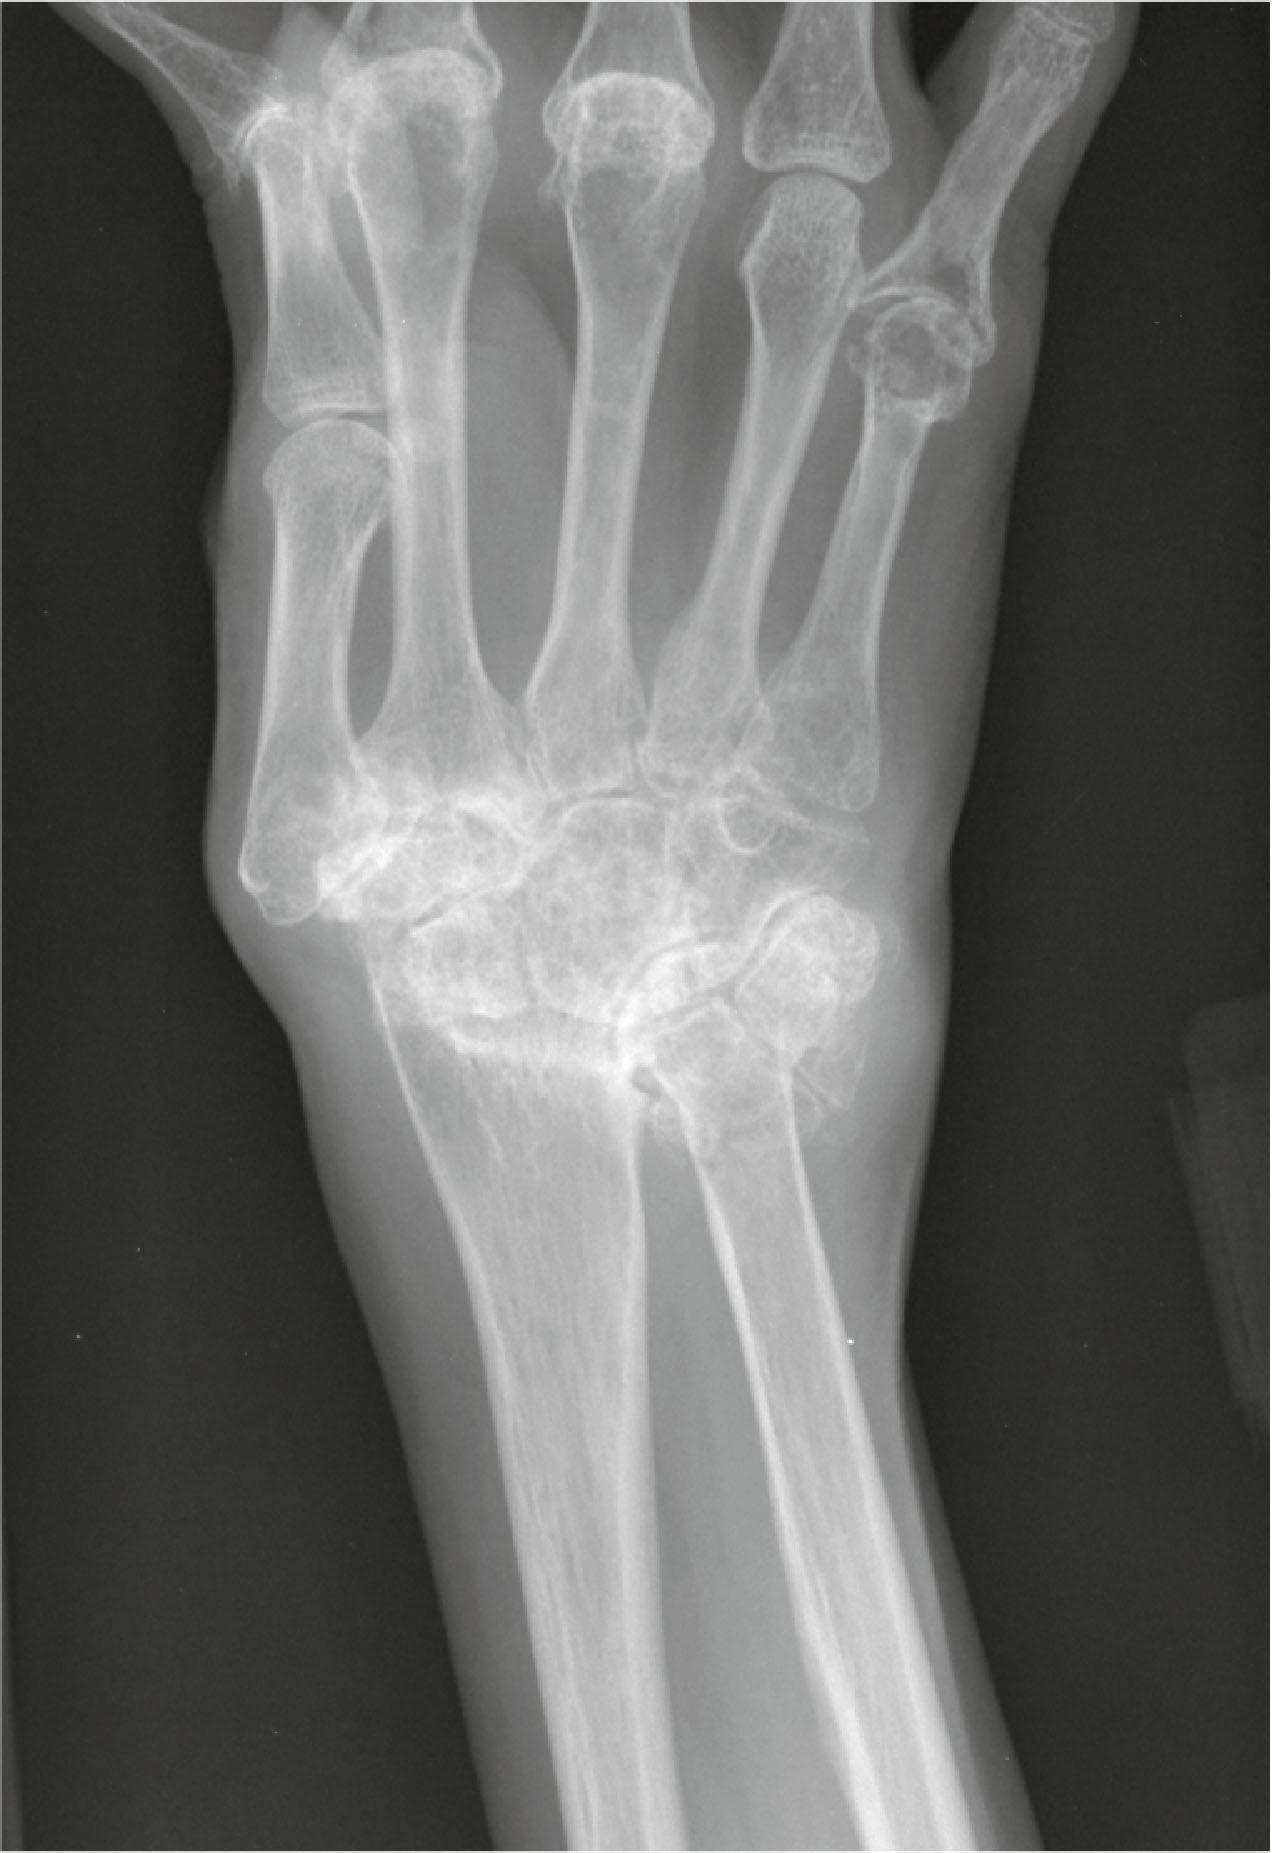 Figure 19.4, PA radiograph of the right wrist, demonstrating severe involvement of the wrist.